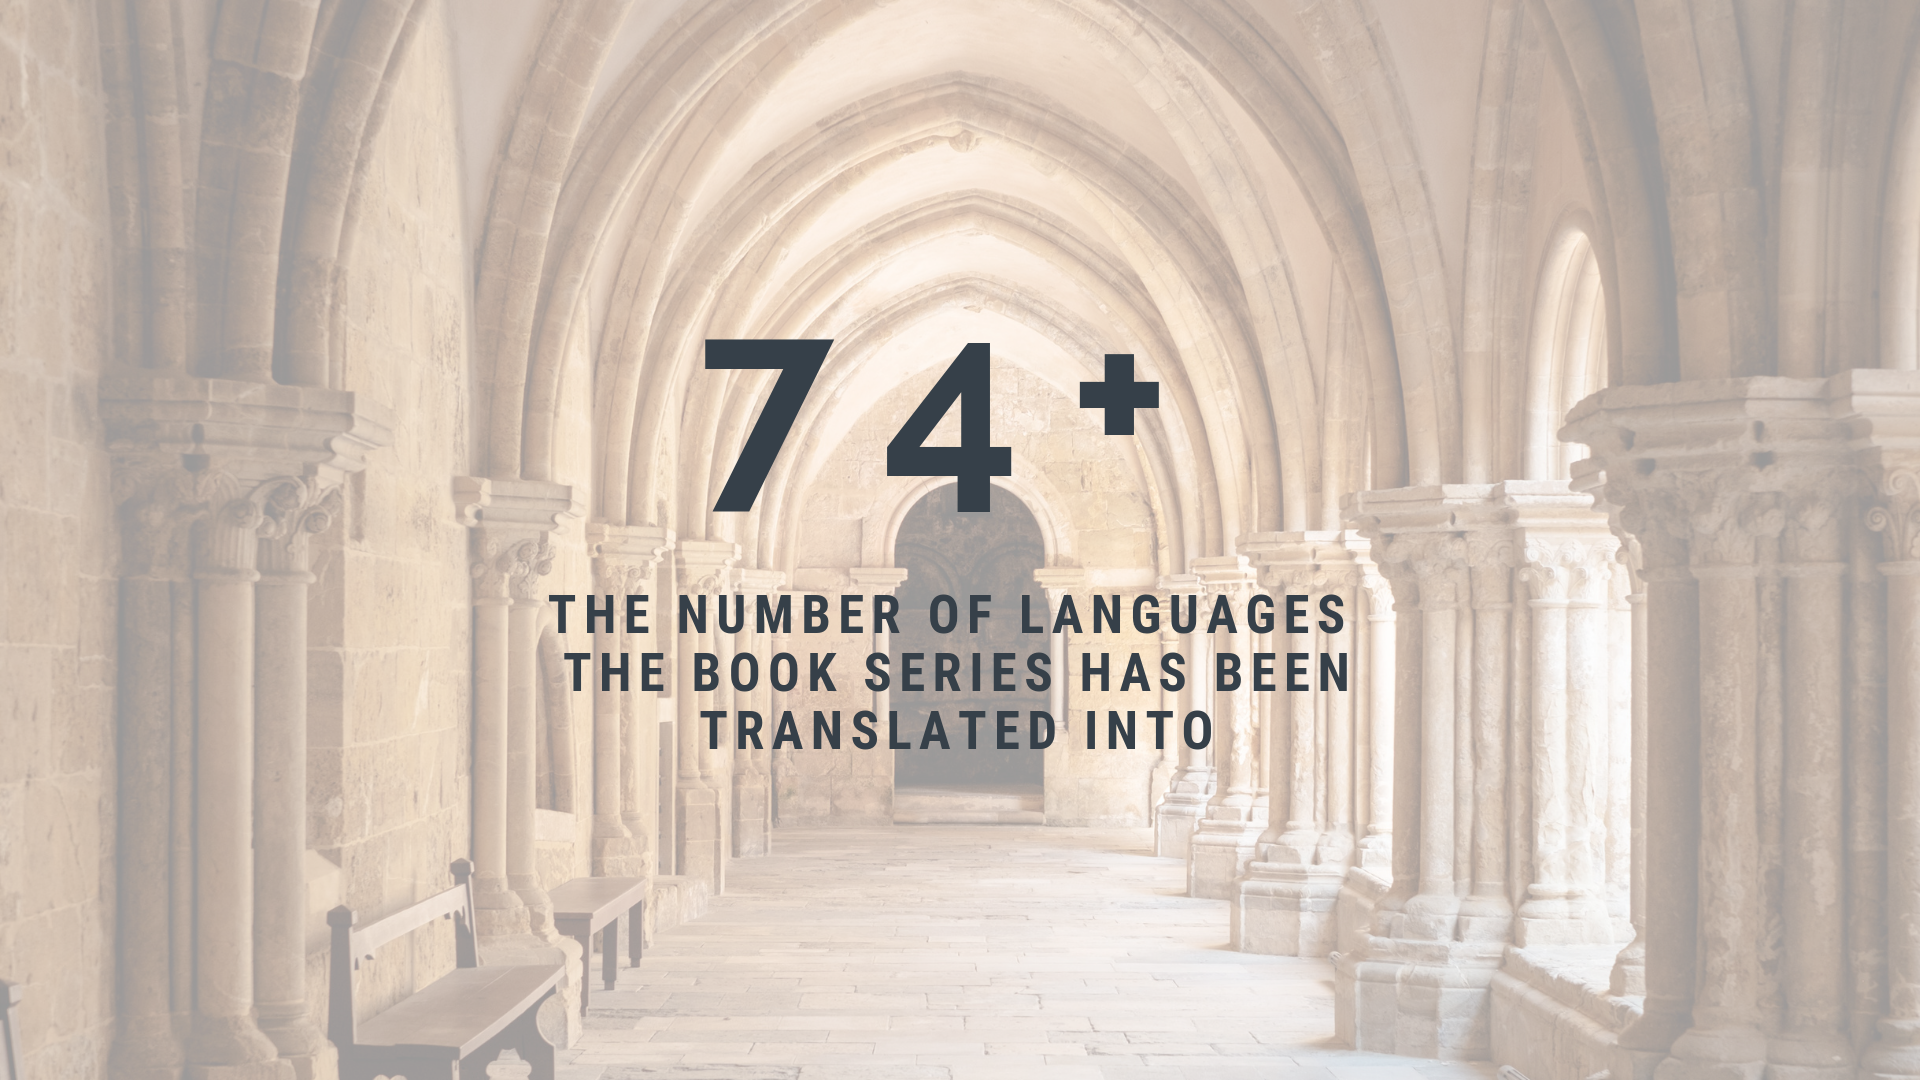 The Magic of Translating Harry Potter: The Number of Languages the Book Series Has been Translated Into